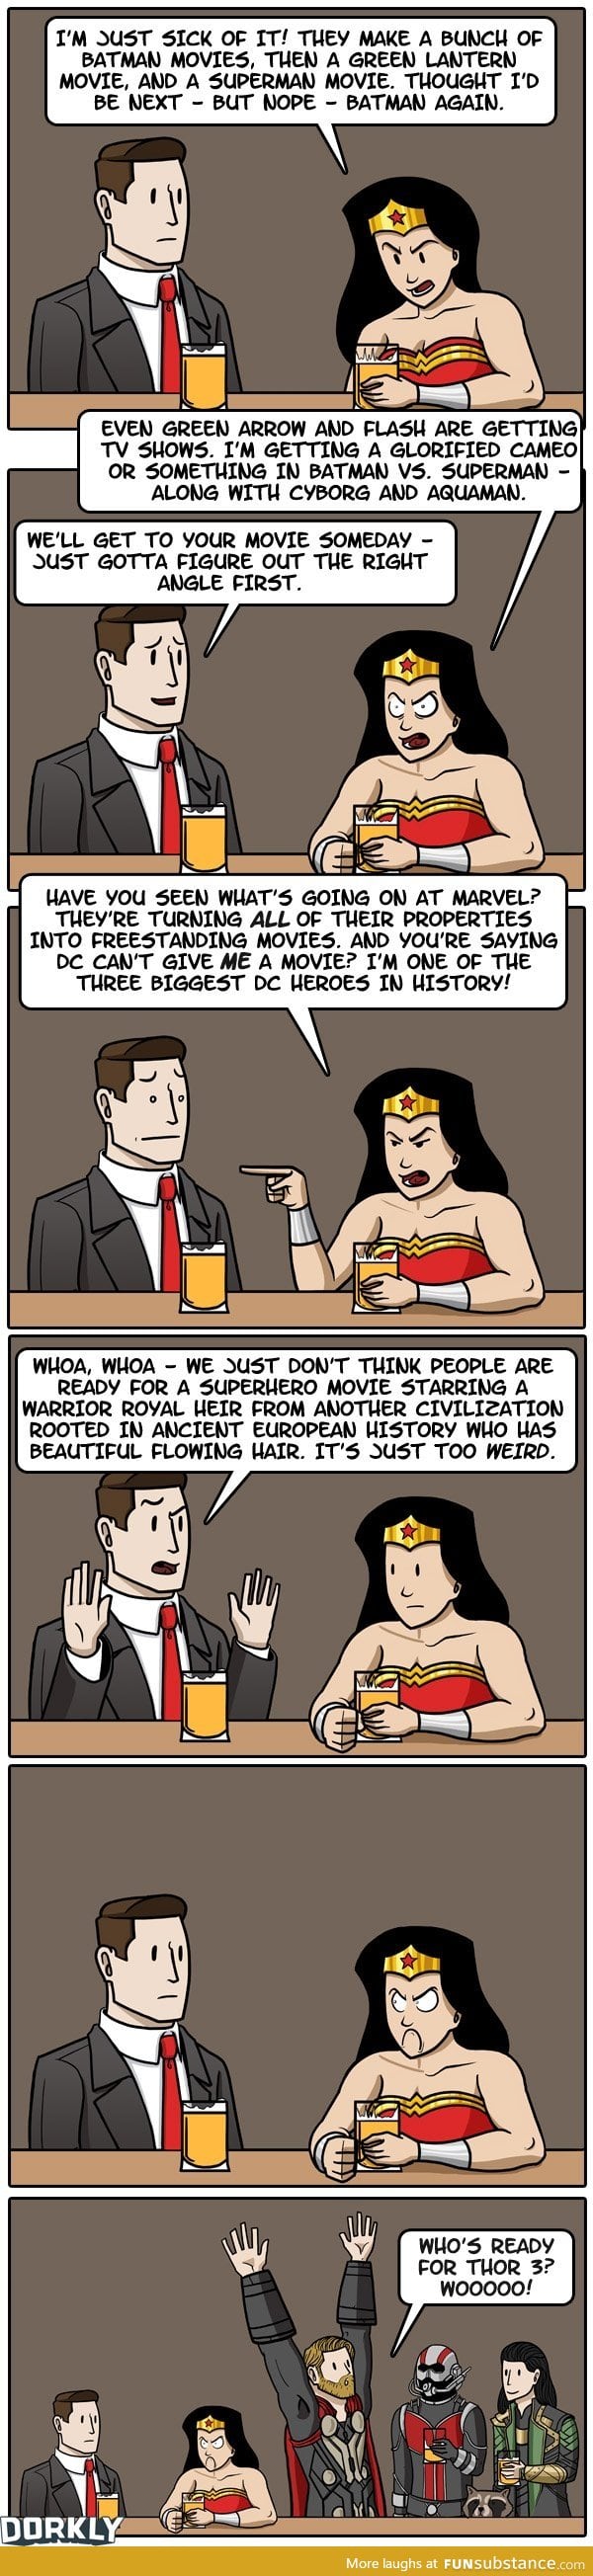 The Trouble With Wonder Woman